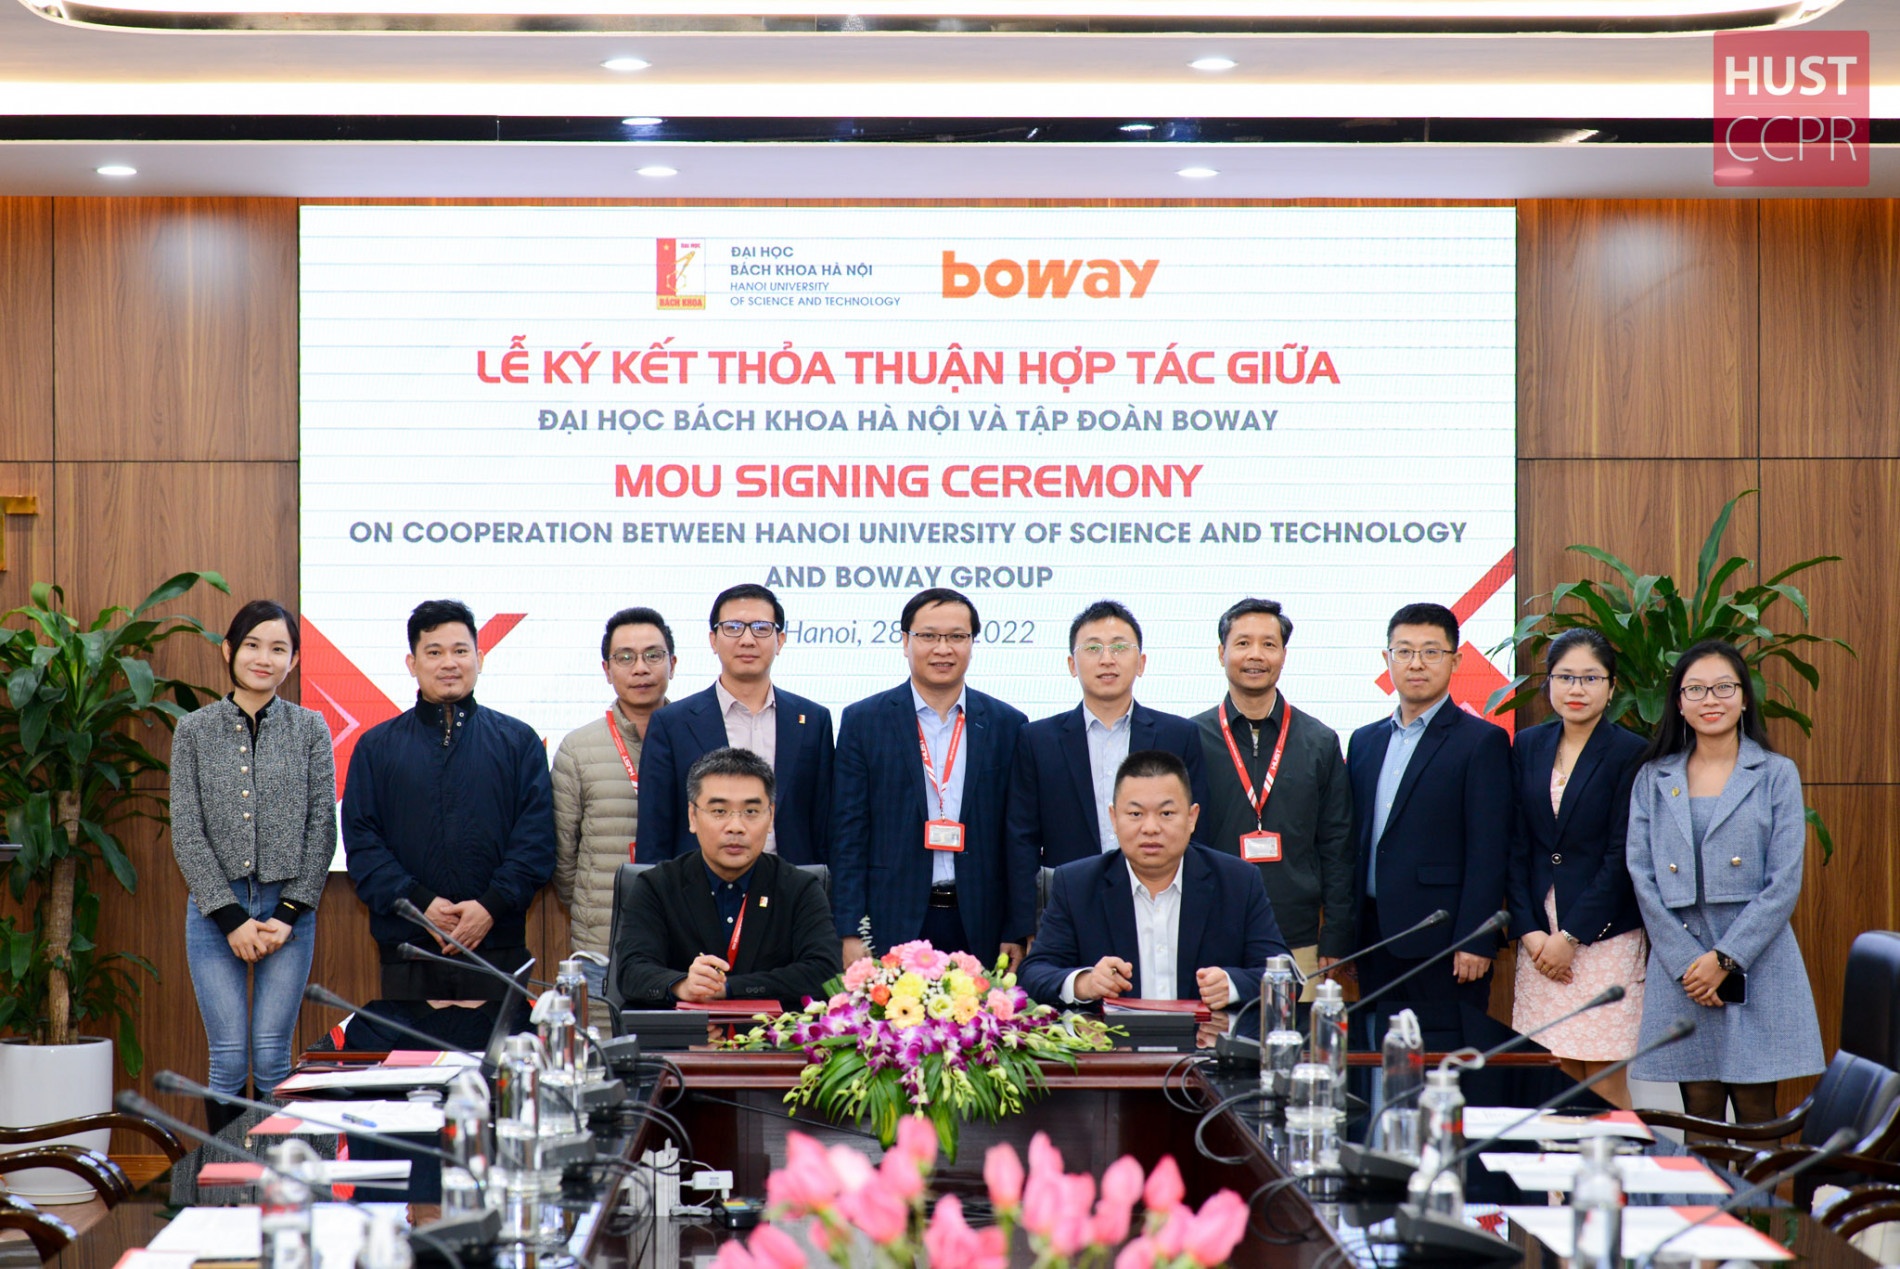 Boway Group to invest $350 million in solar manufacturing facility